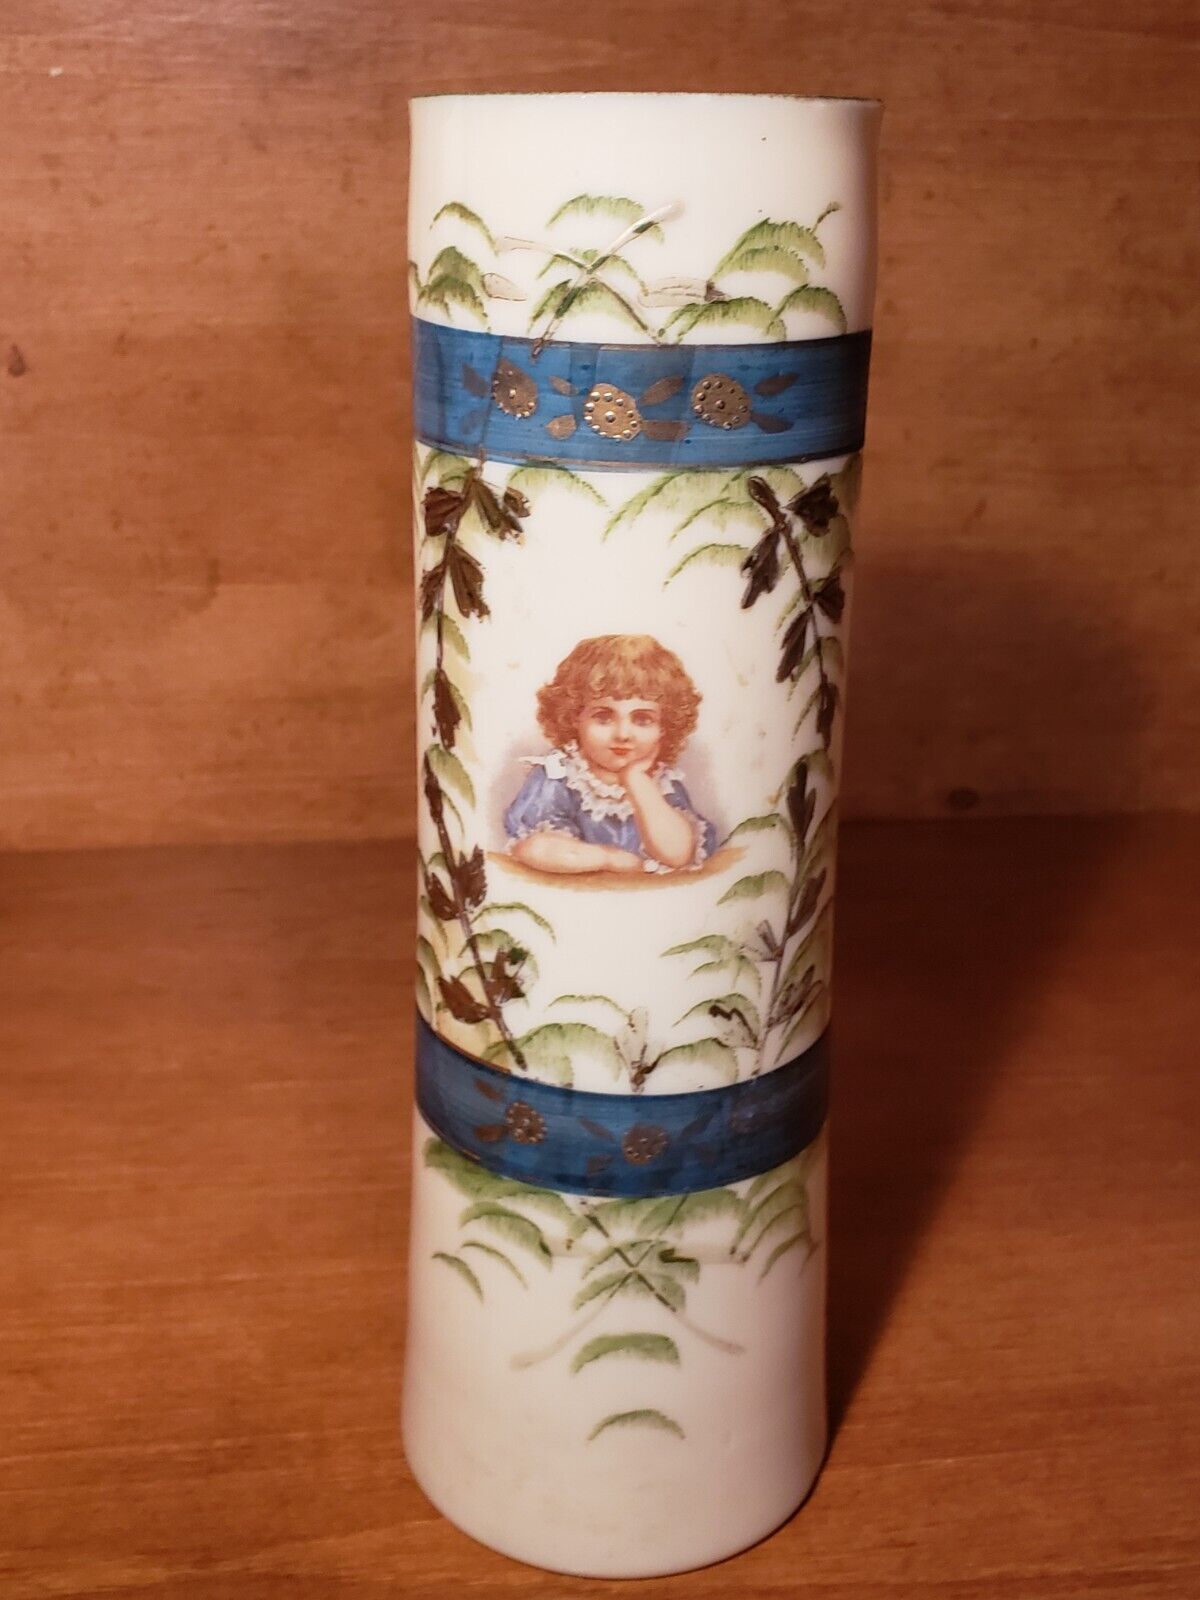 BRISTOL Glass Vase: Hand Painted Child Portrait with One Hand on Chin